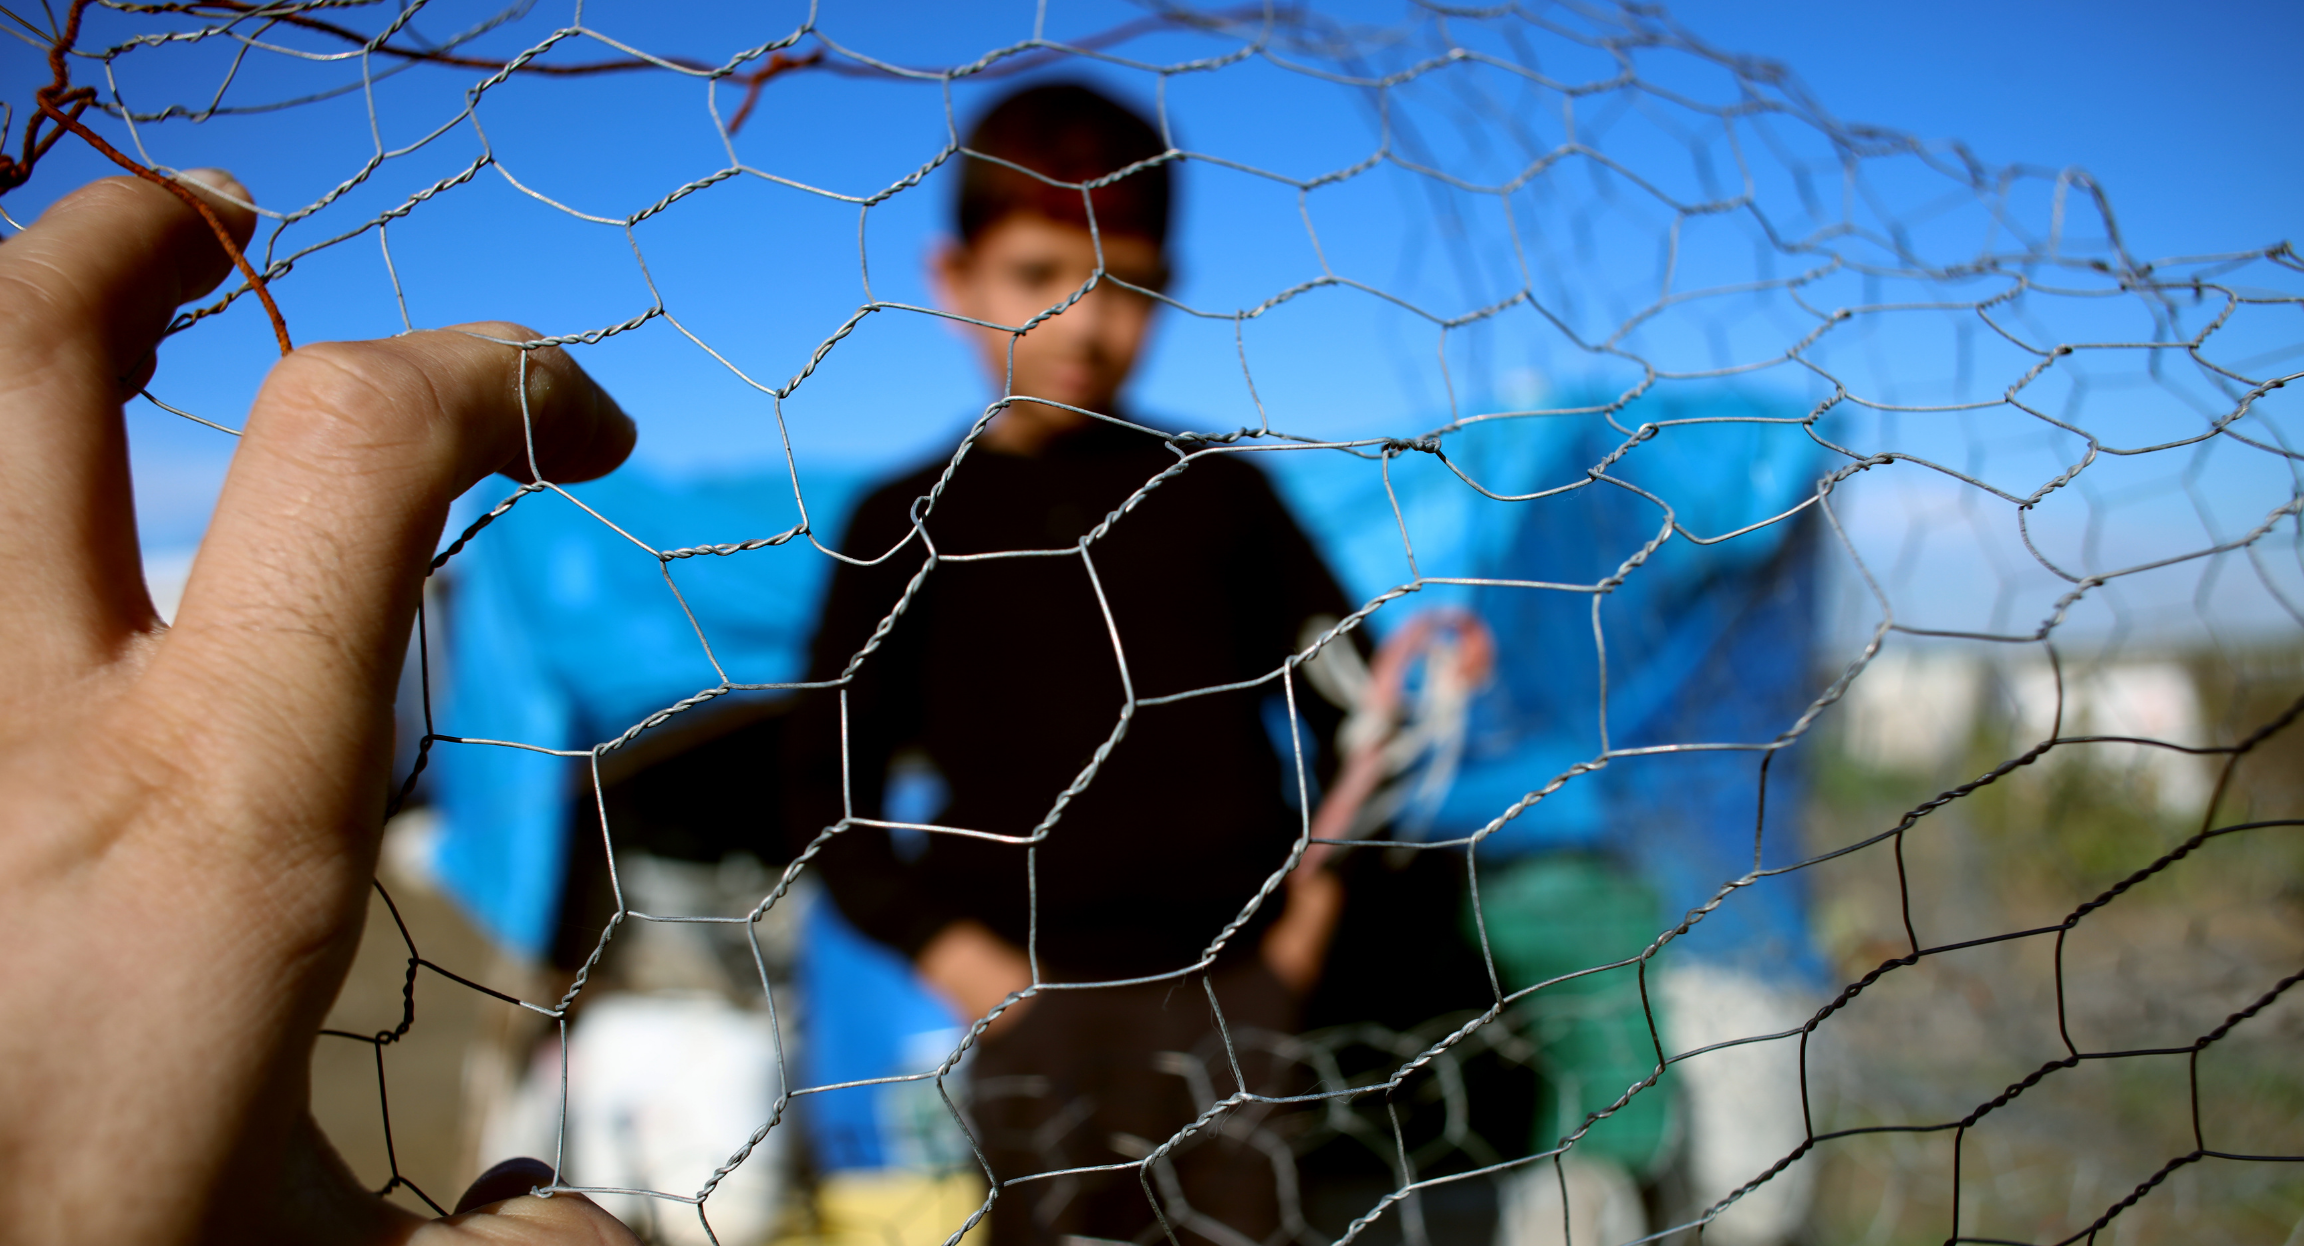 Boy at refugee camp looking through fence